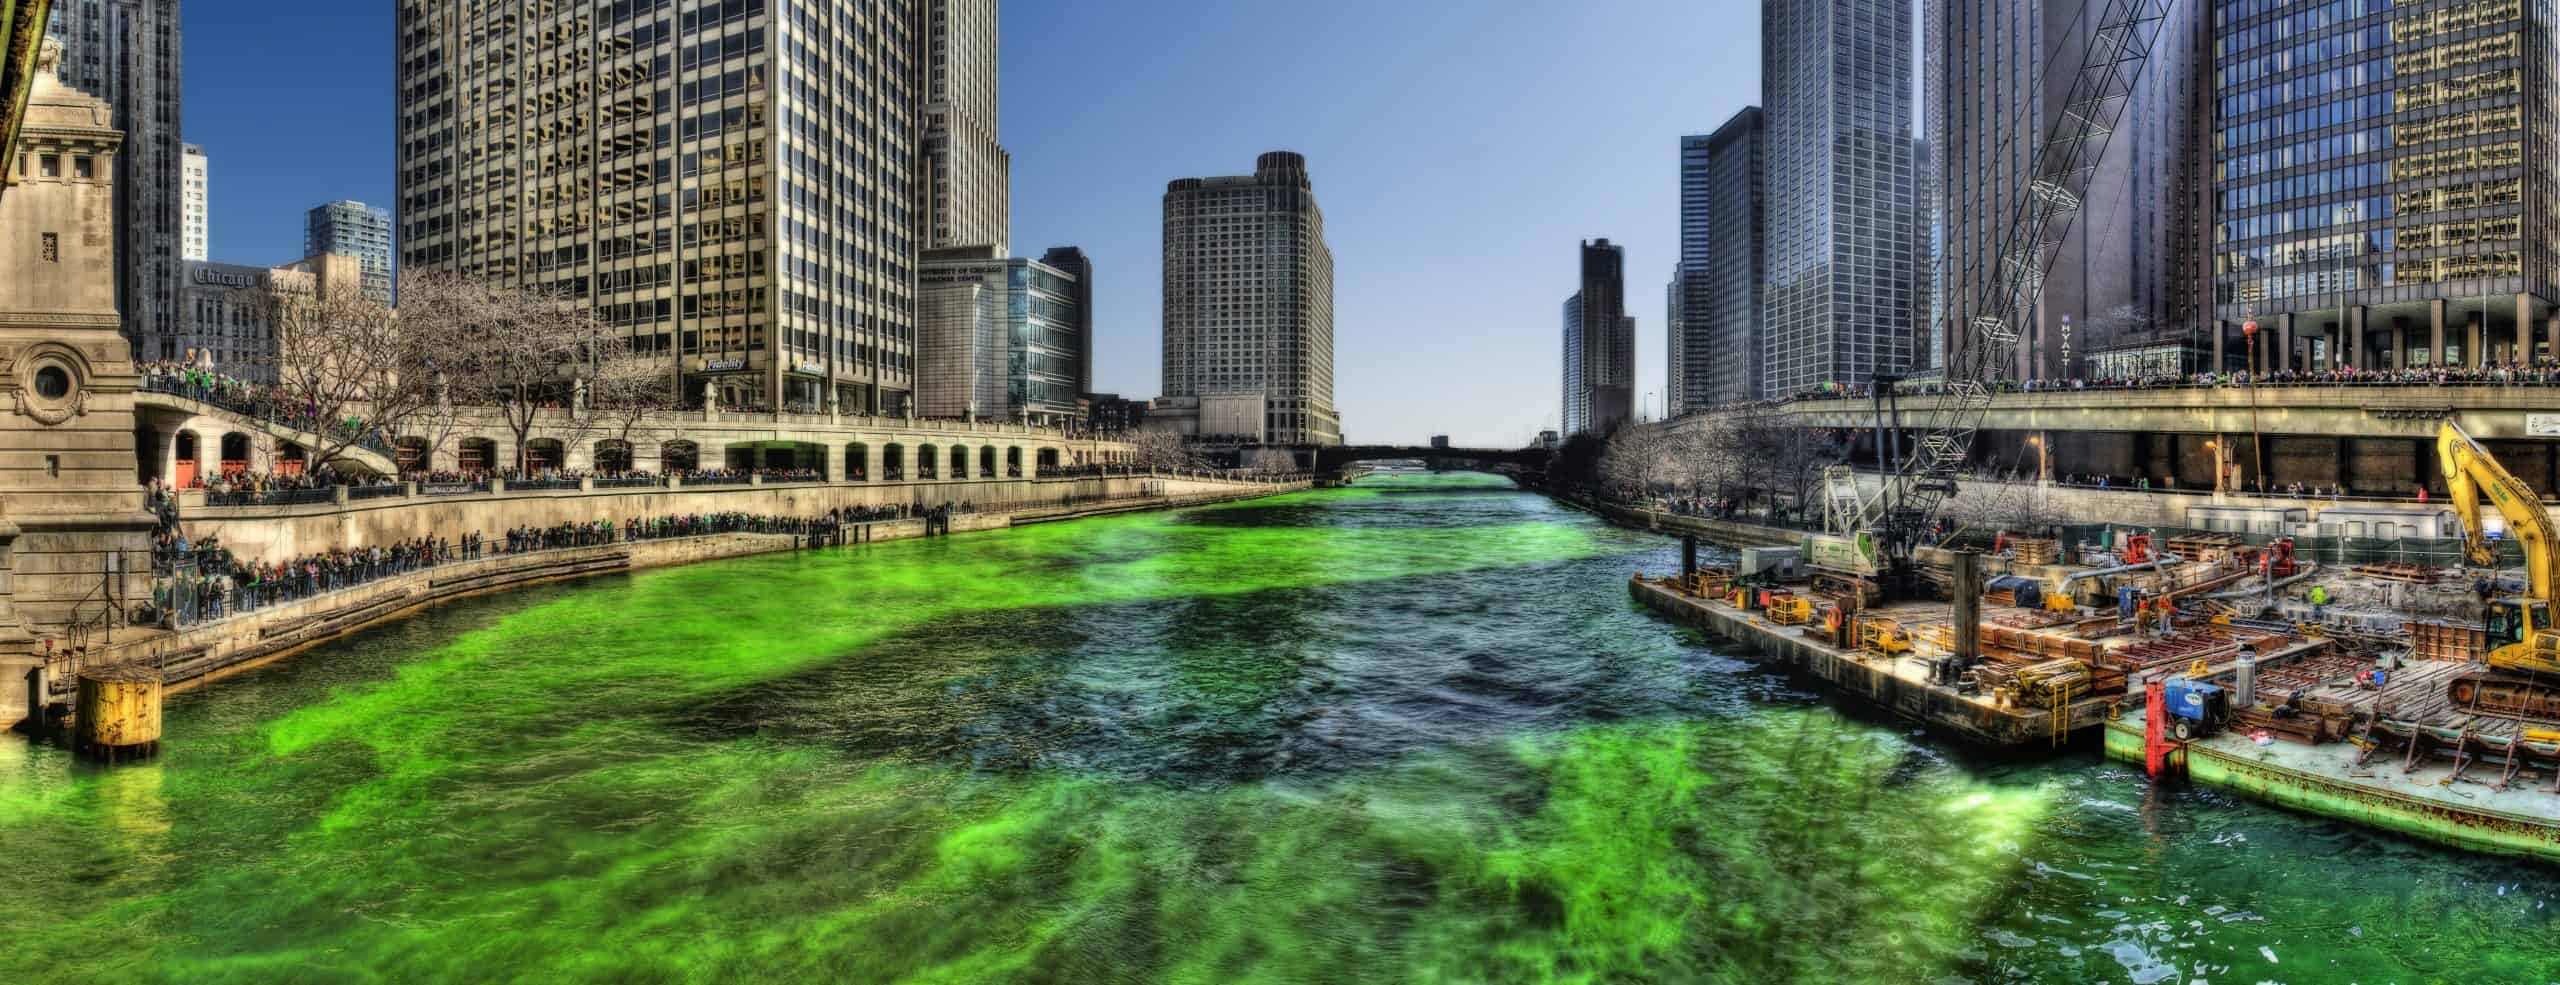 Ask Lyn: Green Rivers for St. Patty's Day?